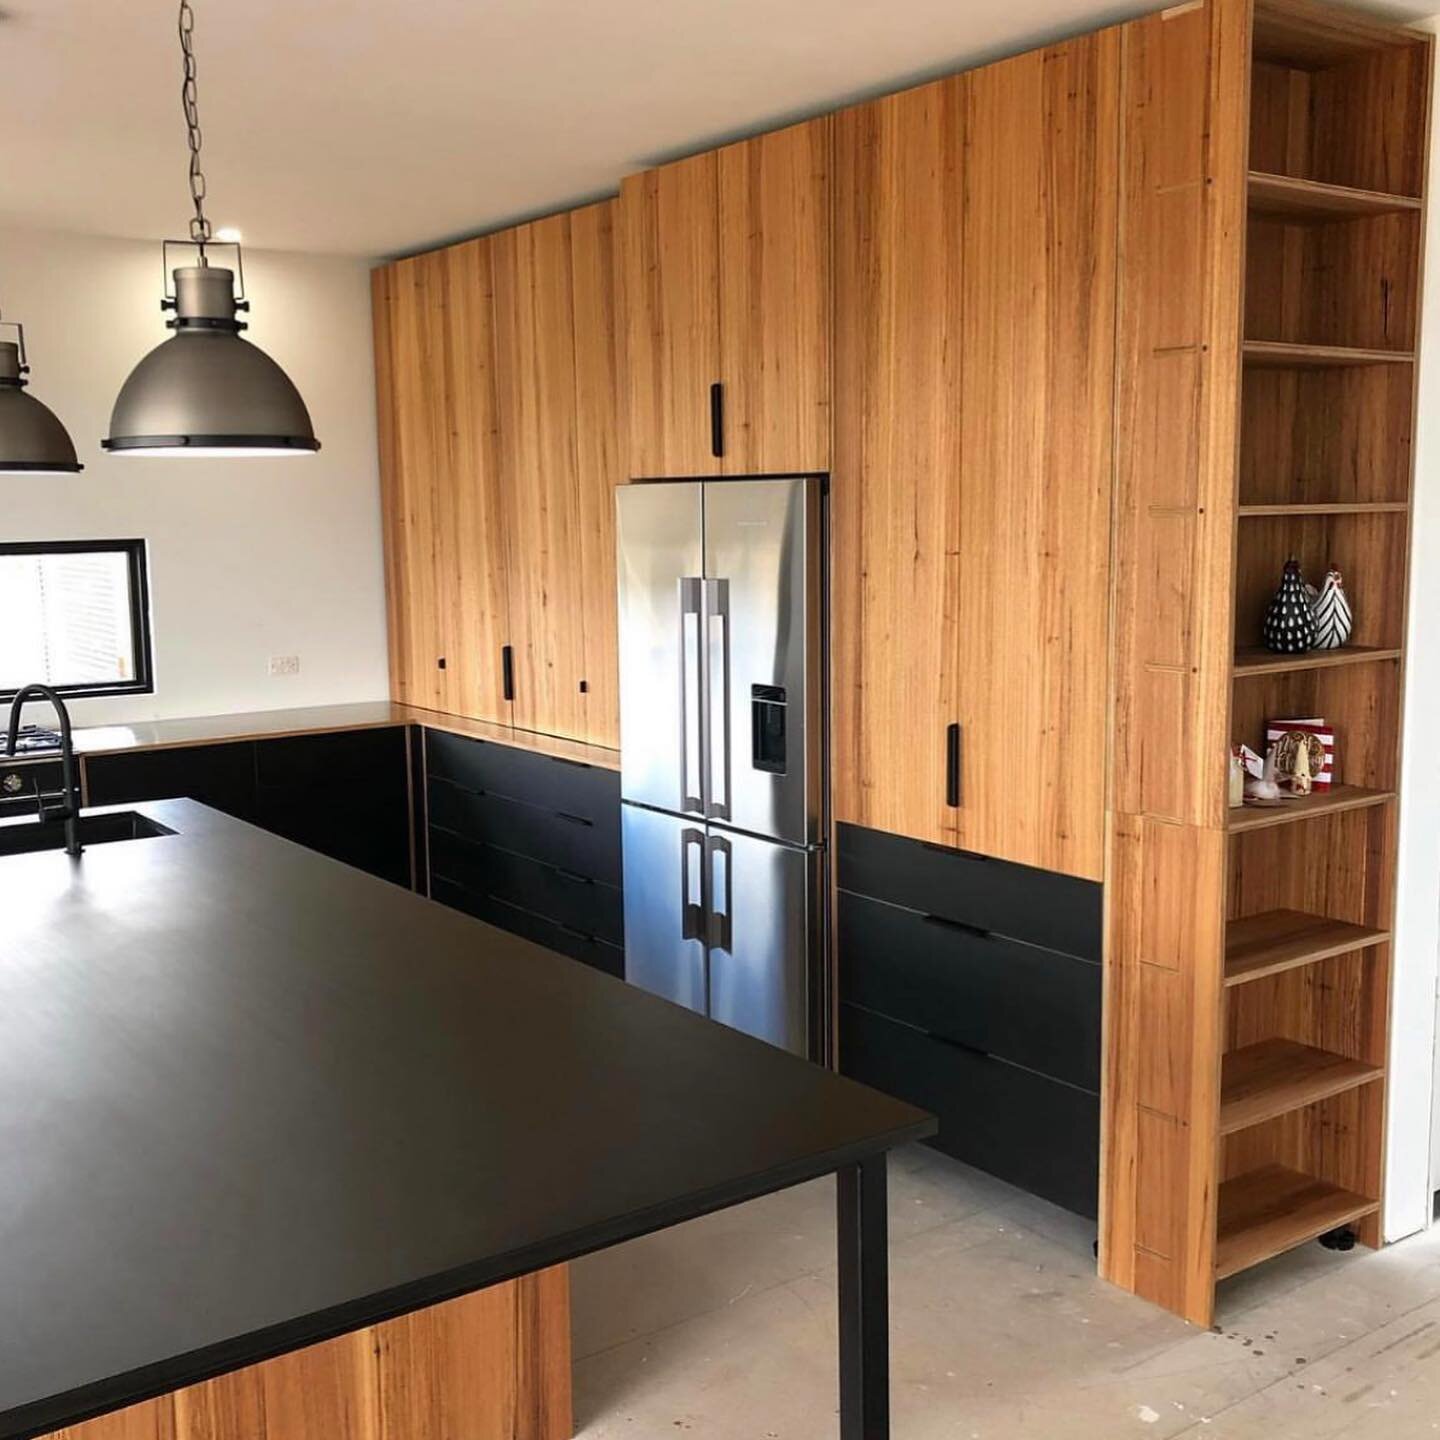 We love this new kitchen by @staunchwoodfurniture using Paperock SOLID for their benchtops.
#australiankitchen #blackkitchen #paperock #paperocksolid